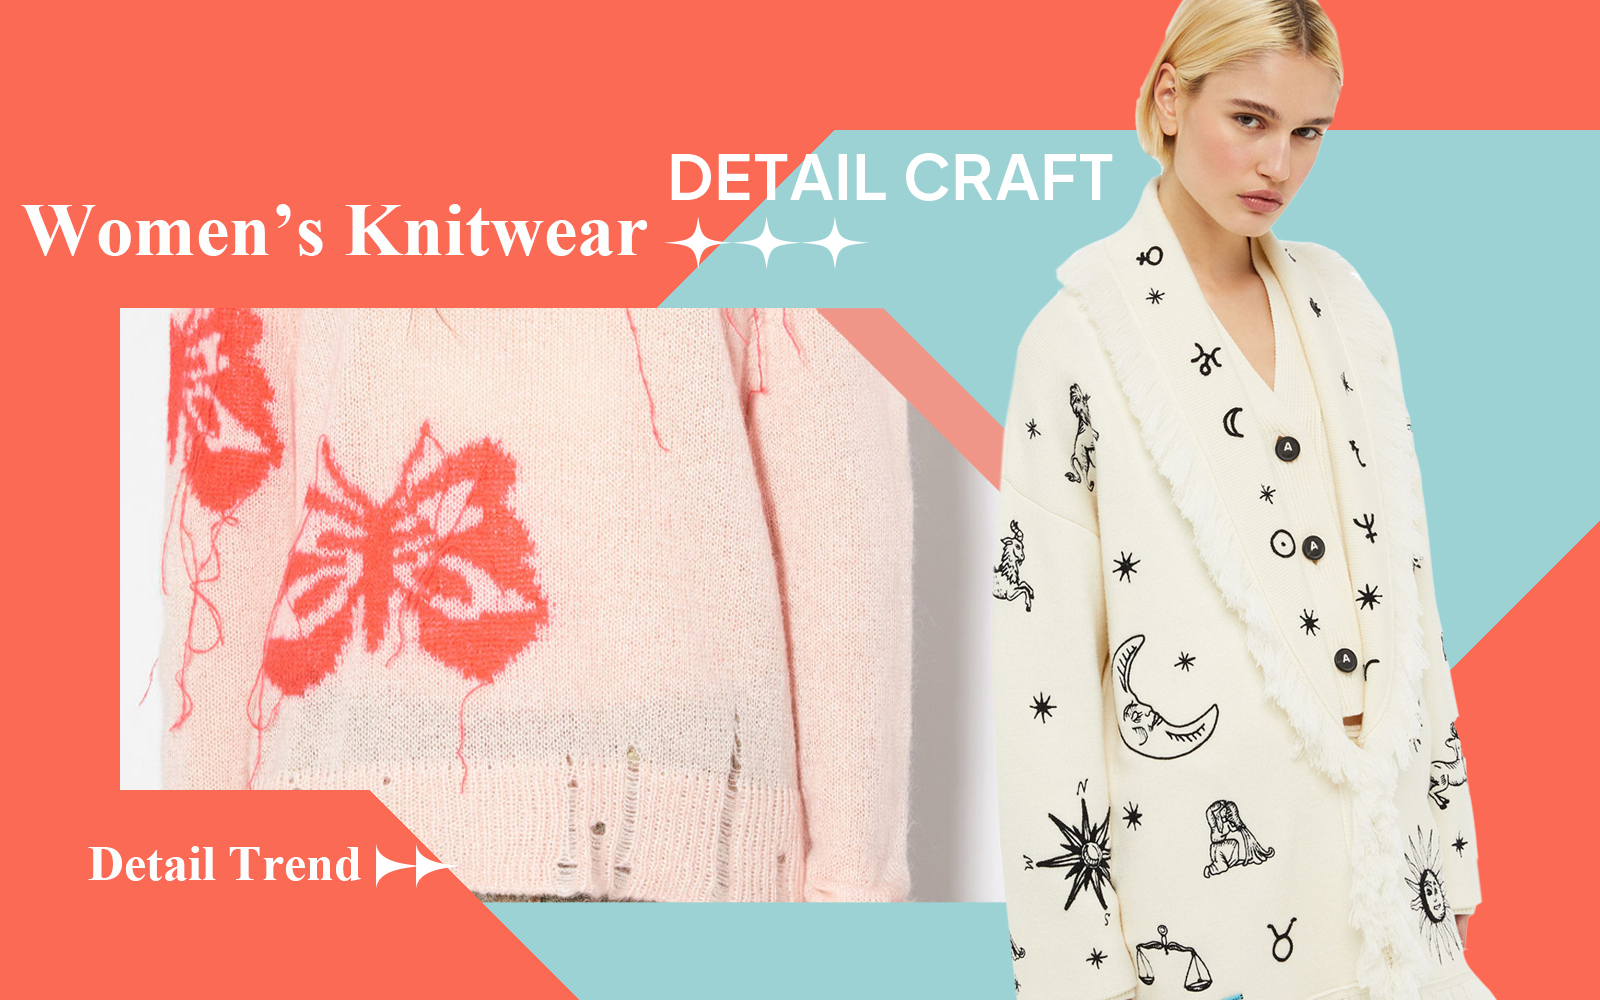 The Detail & Craft Trend for Women's Knitwear